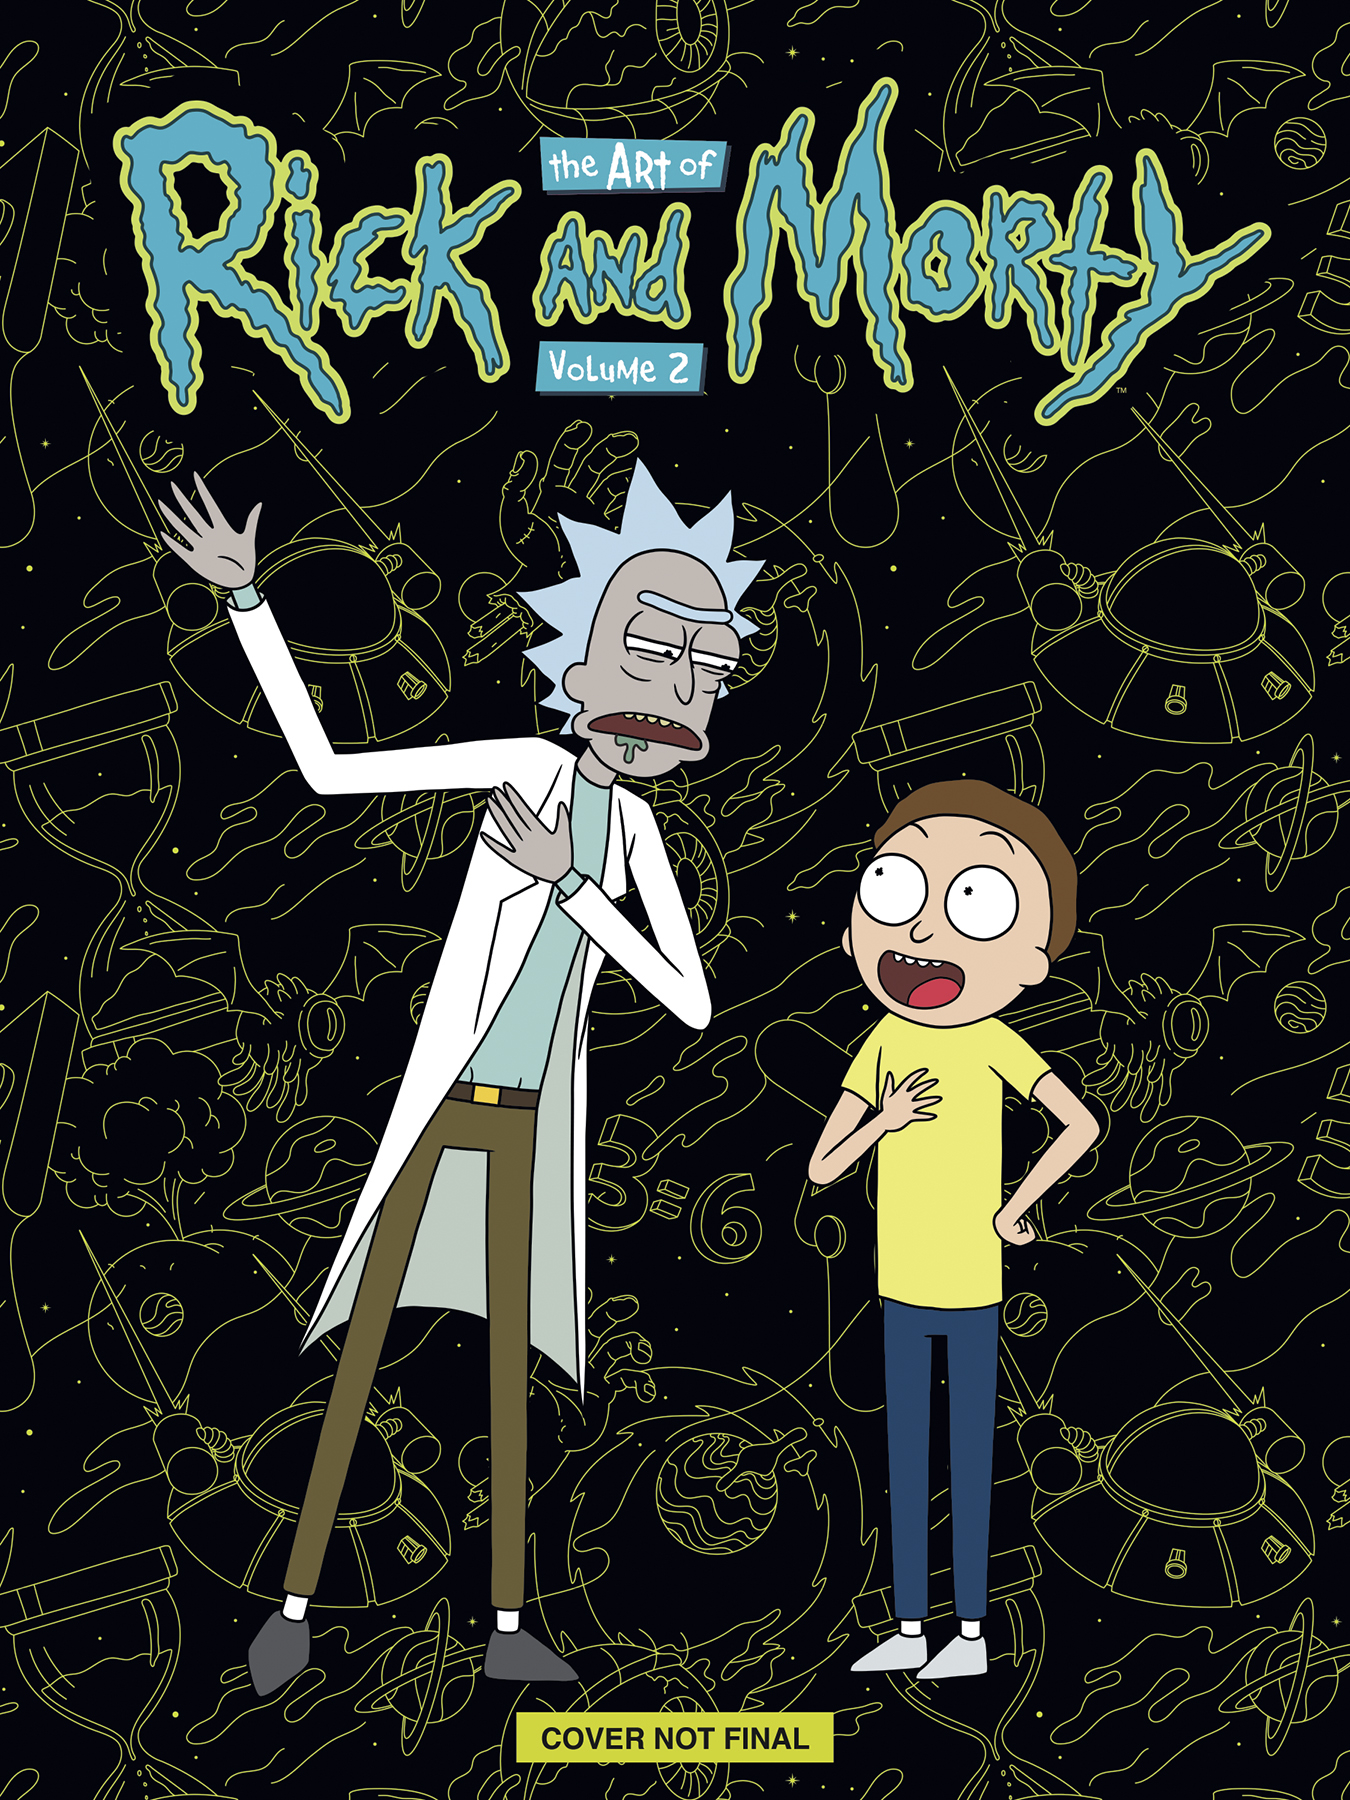 Art of Rick and Morty Hardcover Volume 2